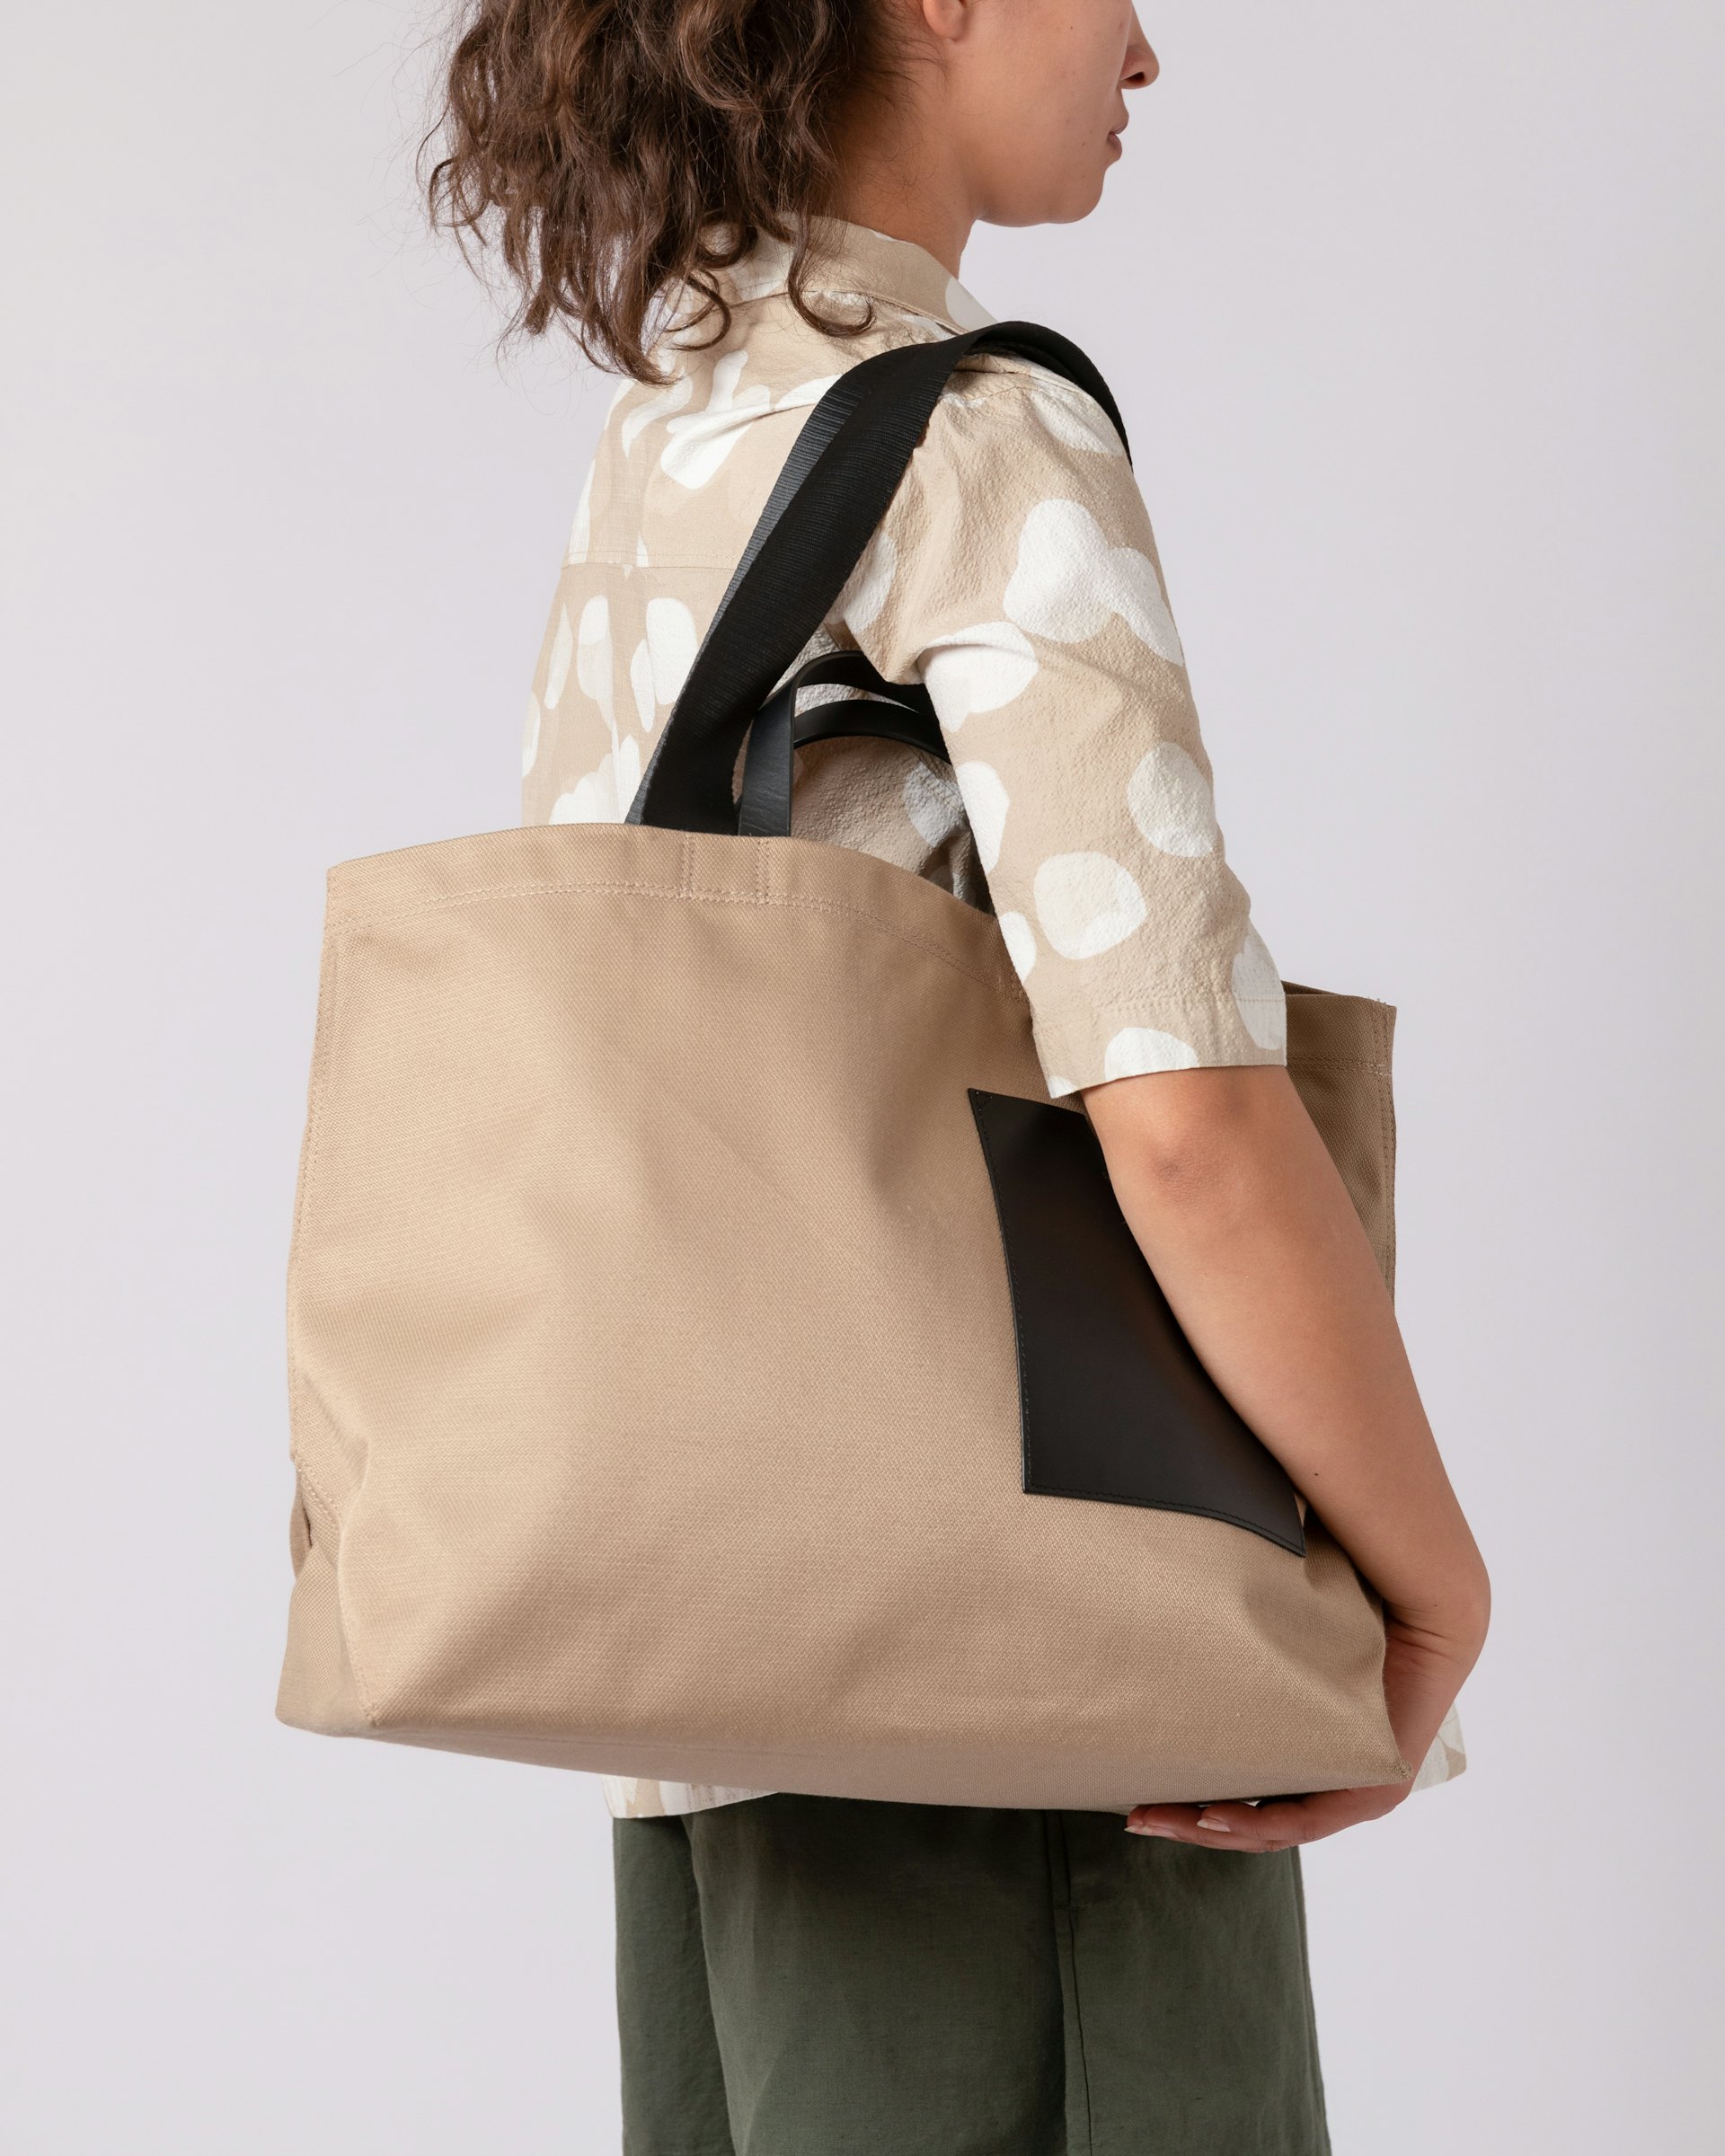 Agnes belongs to the category Tote bags and is in color black & beige (7 of 7)